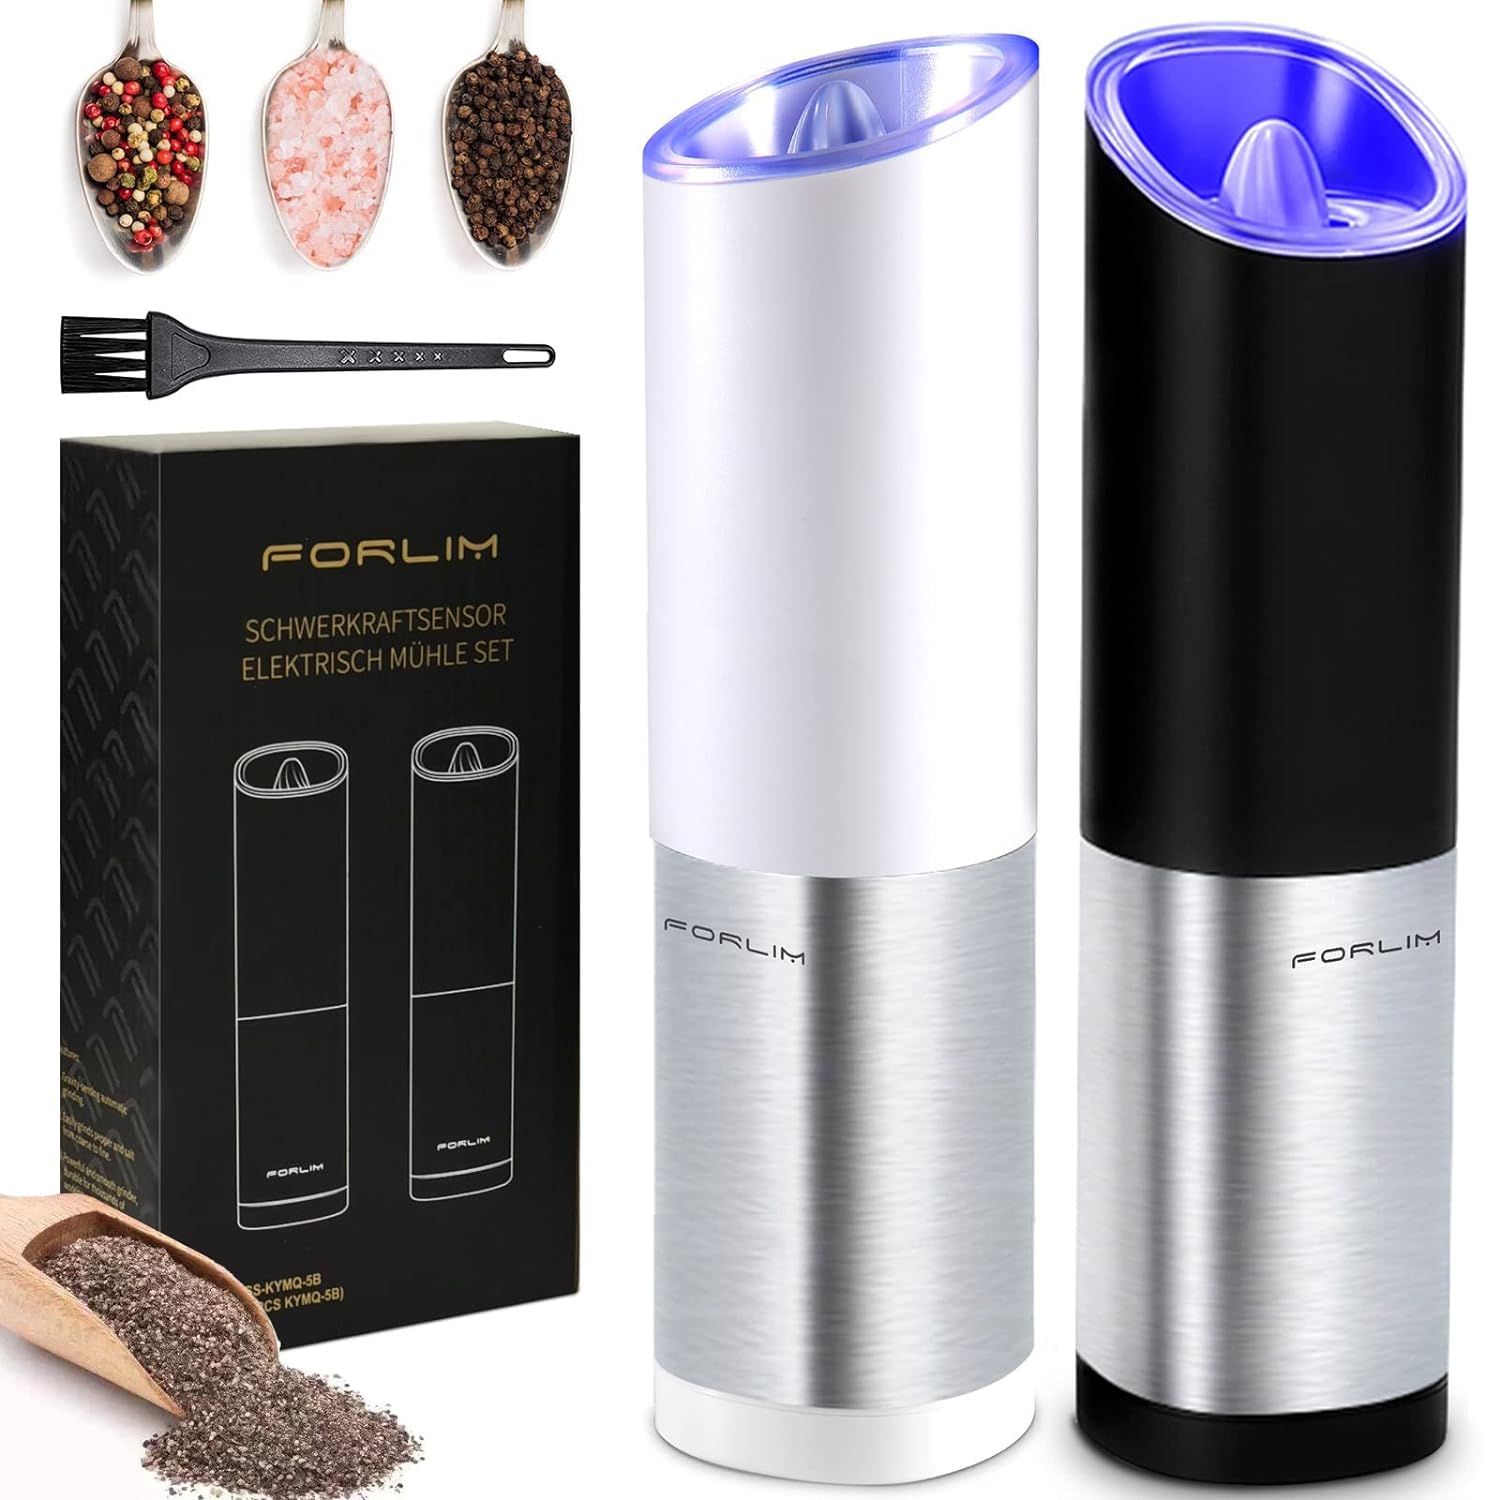 FORLIM Gravity Electric Salt and Pepper Grinder Set Battery Operated, Adjustable Coarseness, Blue LED Light, One Hand Automatic Operation, Stainless Steel Black+White, 2 Pack